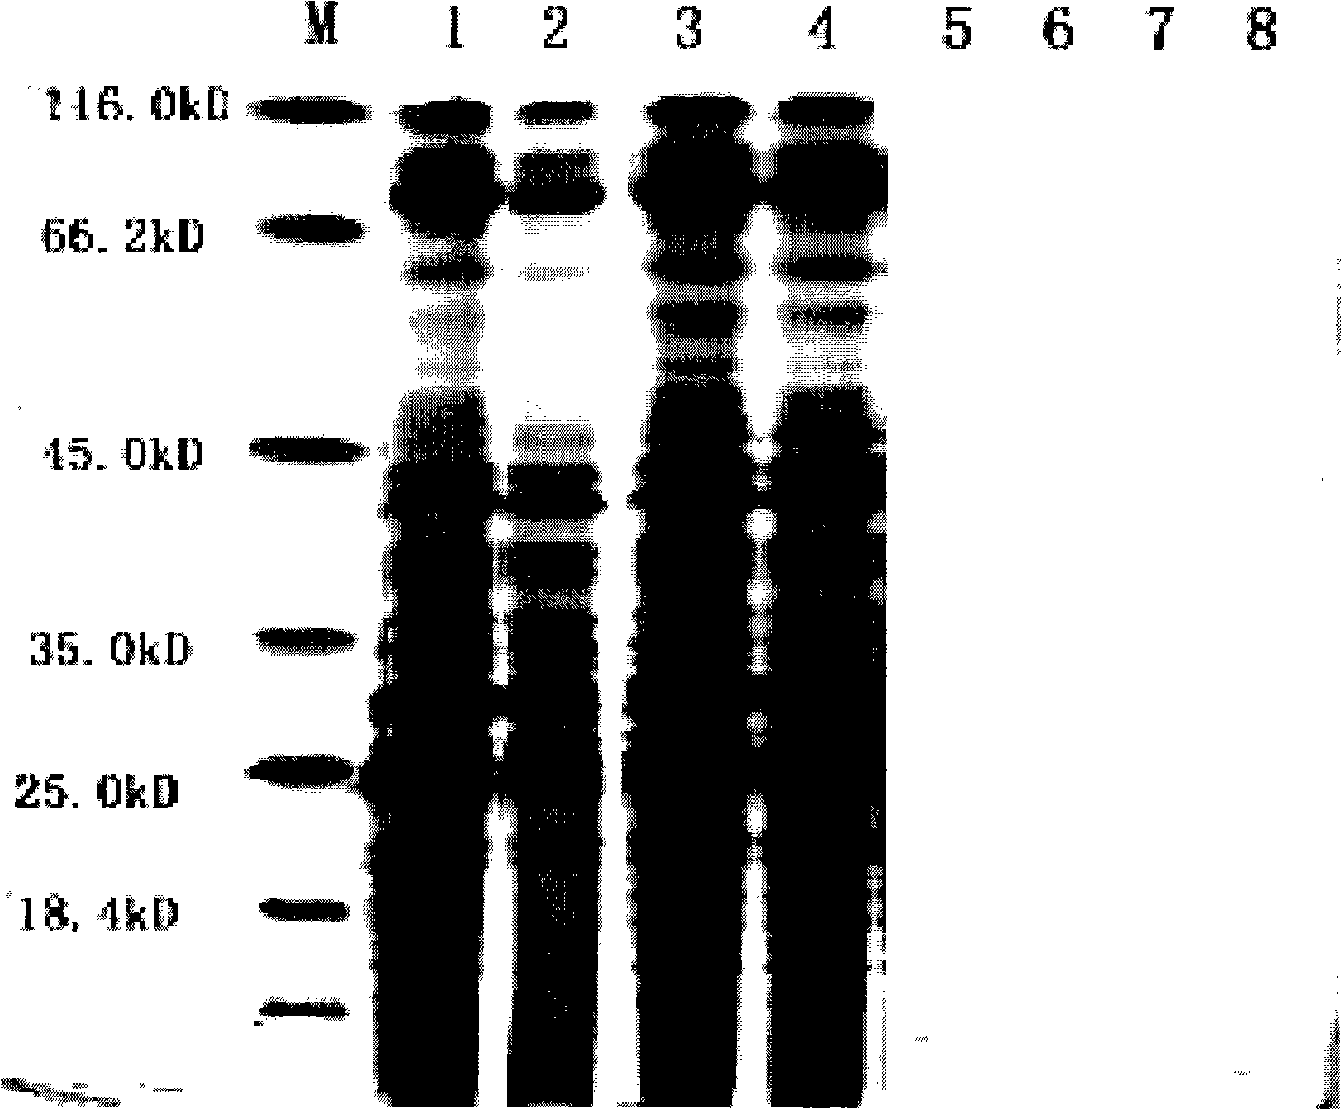 Transgenic yeast containing flounder growth hormone gene, preparation and application thereof